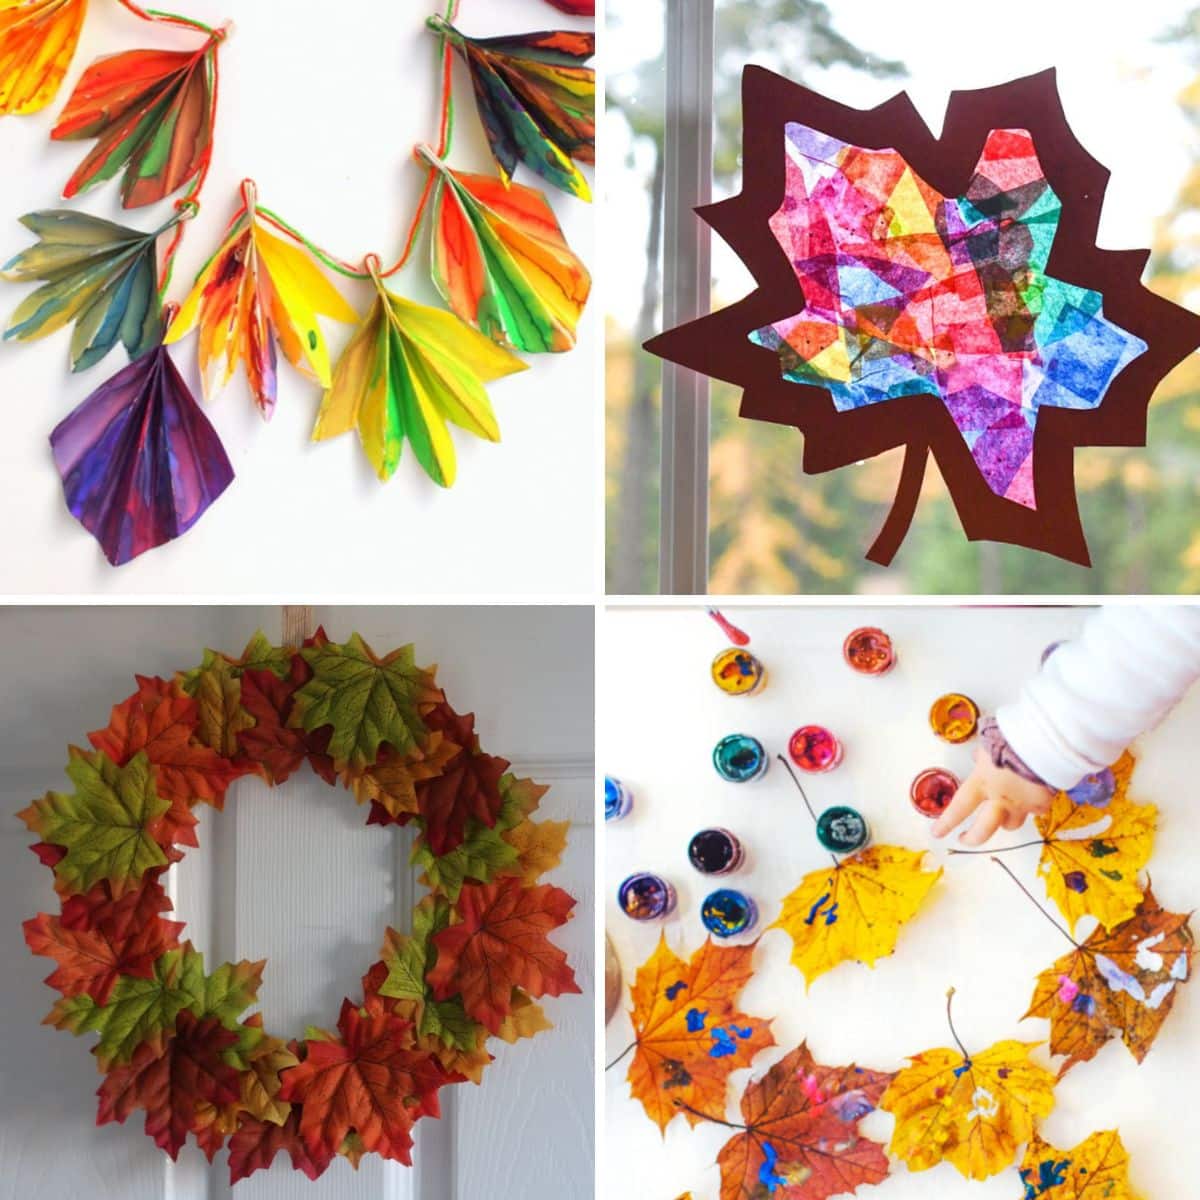 4 images of autums inspired crafts.